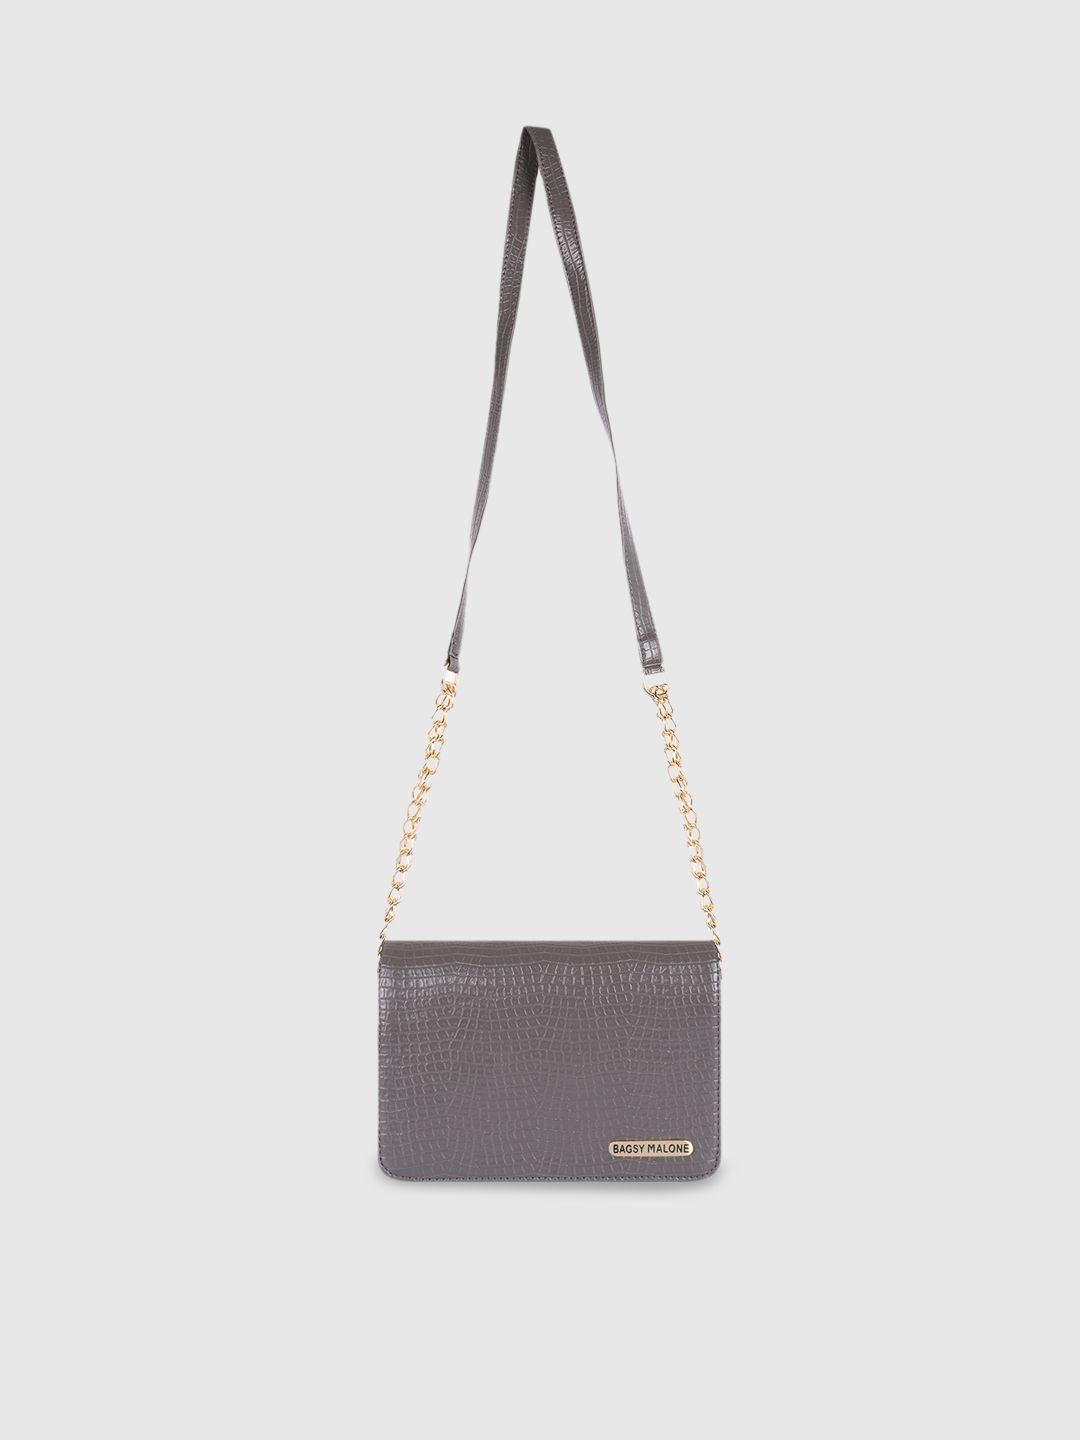 bagsy malone grey textured pu structured sling bag